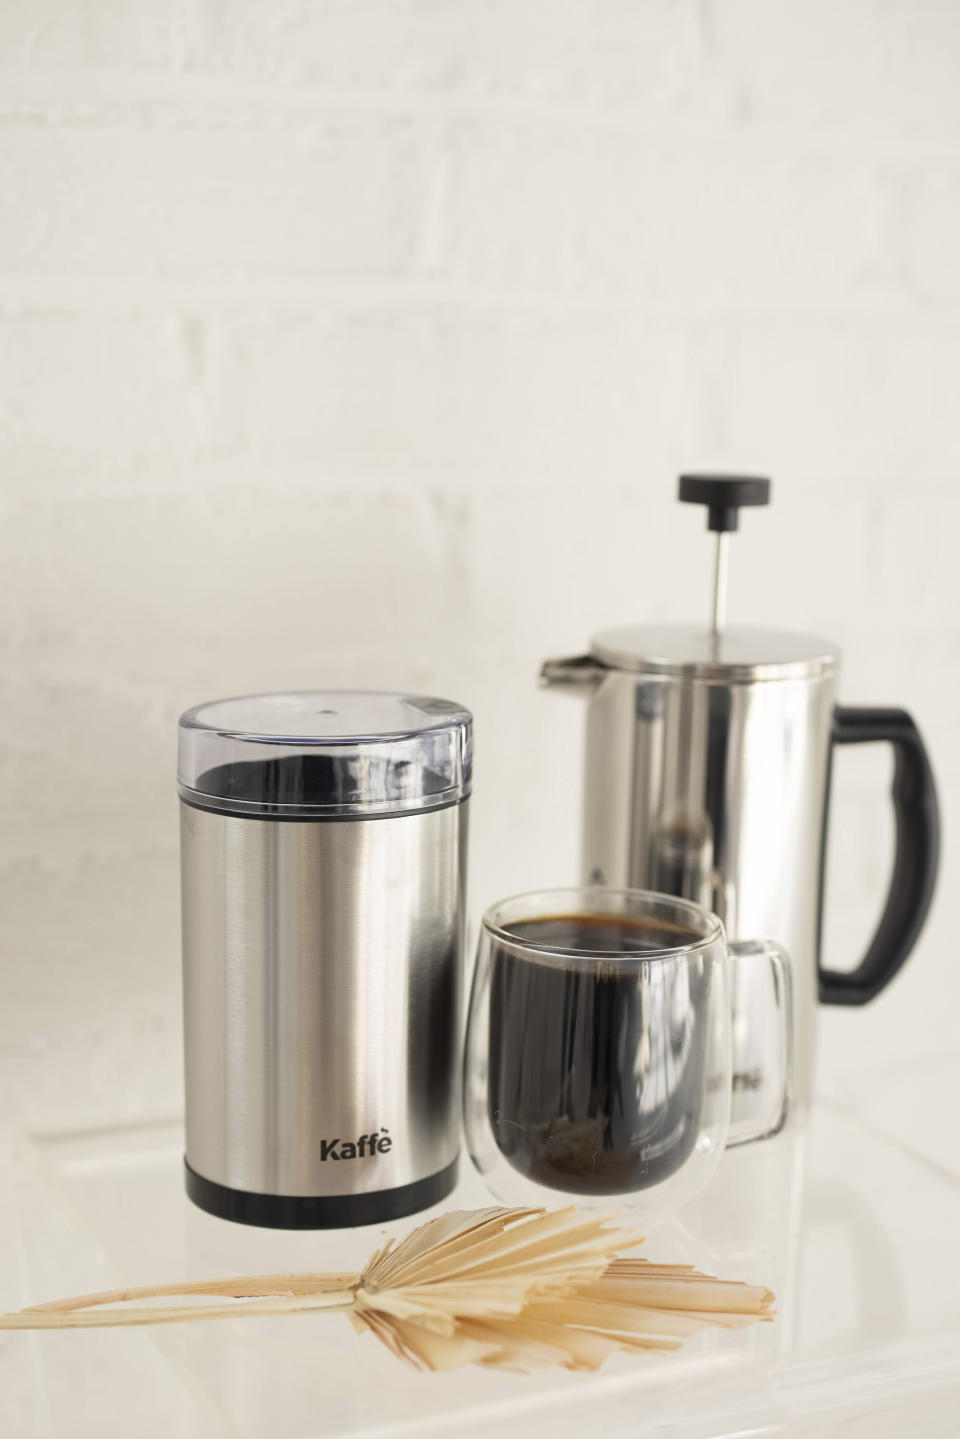 This photo supplied by Kaffe shows some of the basics of home coffee making: a grinder, French press and simple mug. Instant is in, fancy is out. Nothing stays the same for long in the world of home-brewed coffee. (Kaffe via AP)